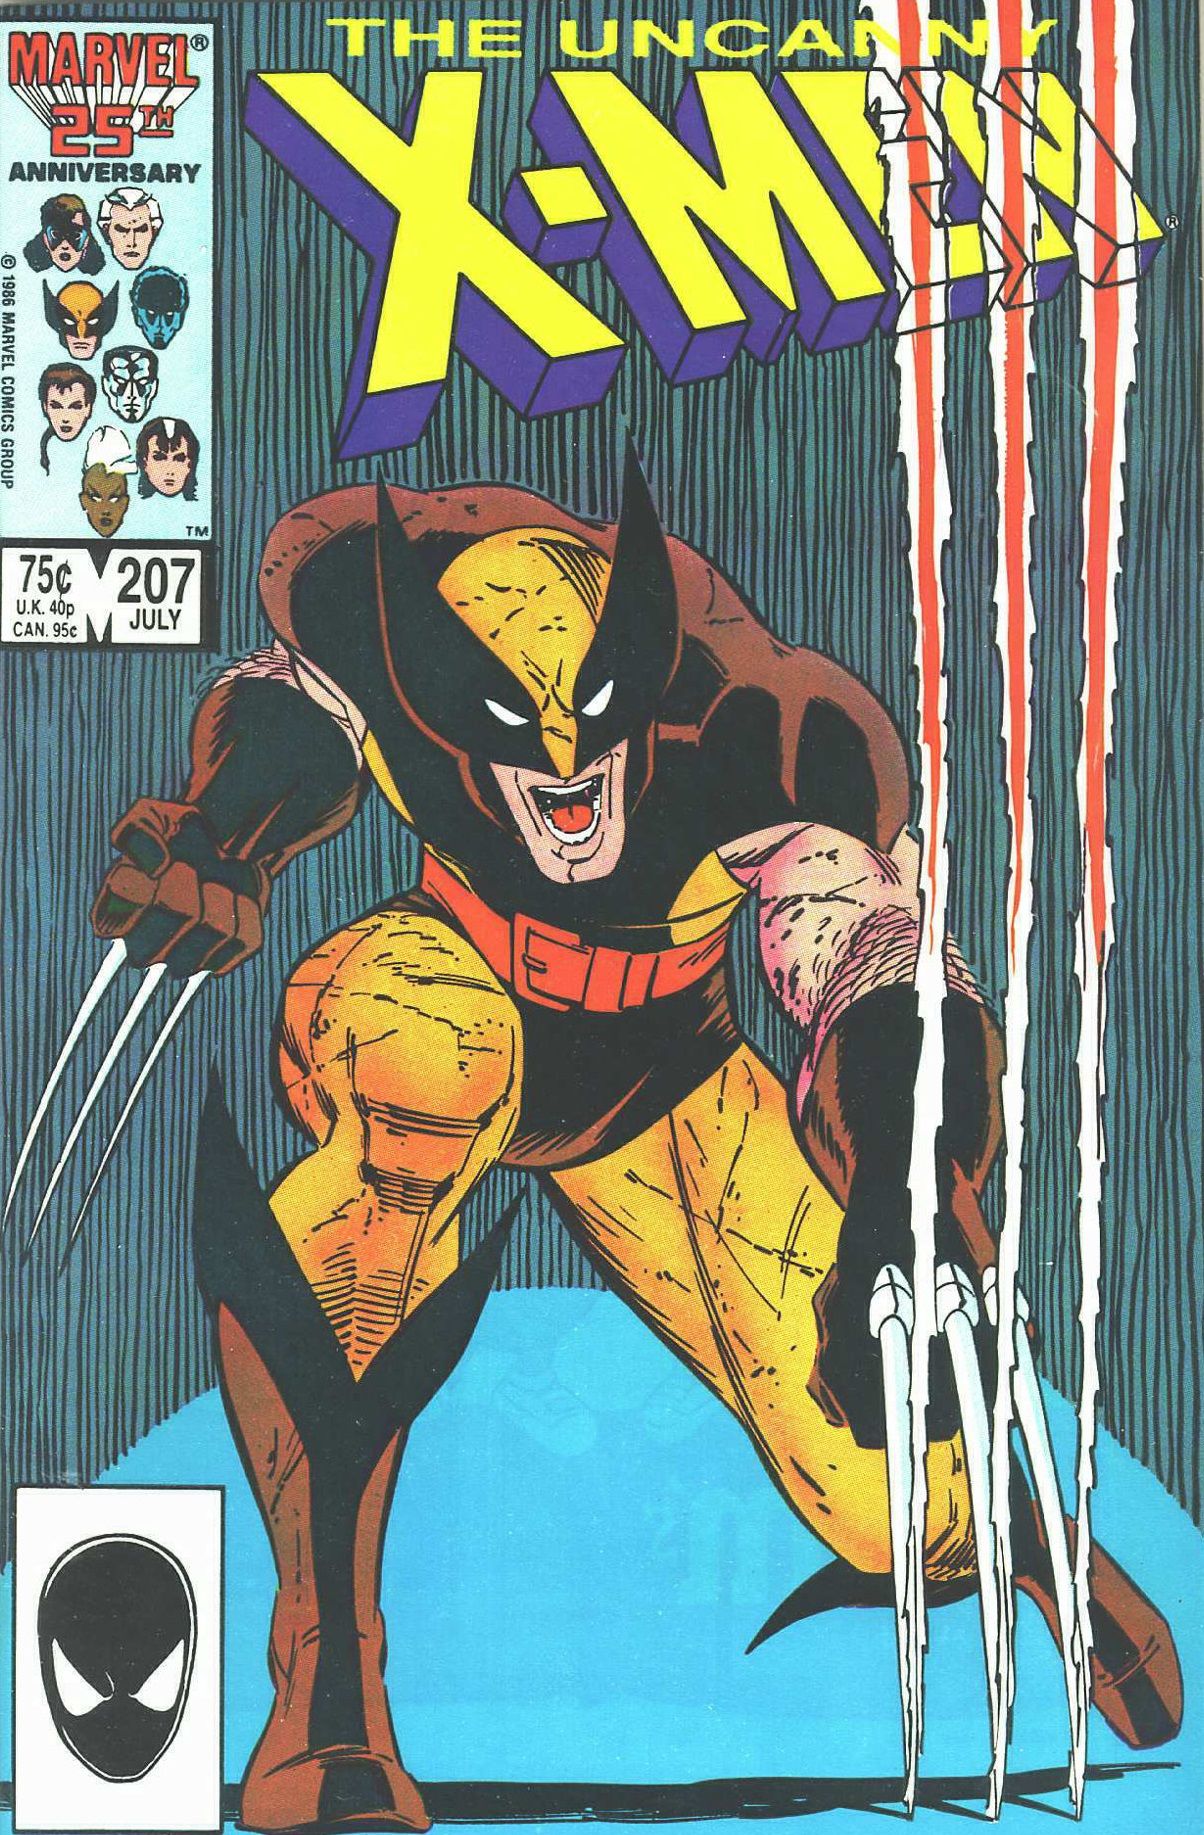 Wolverine cutting through the cover of Uncanny X-Men #207